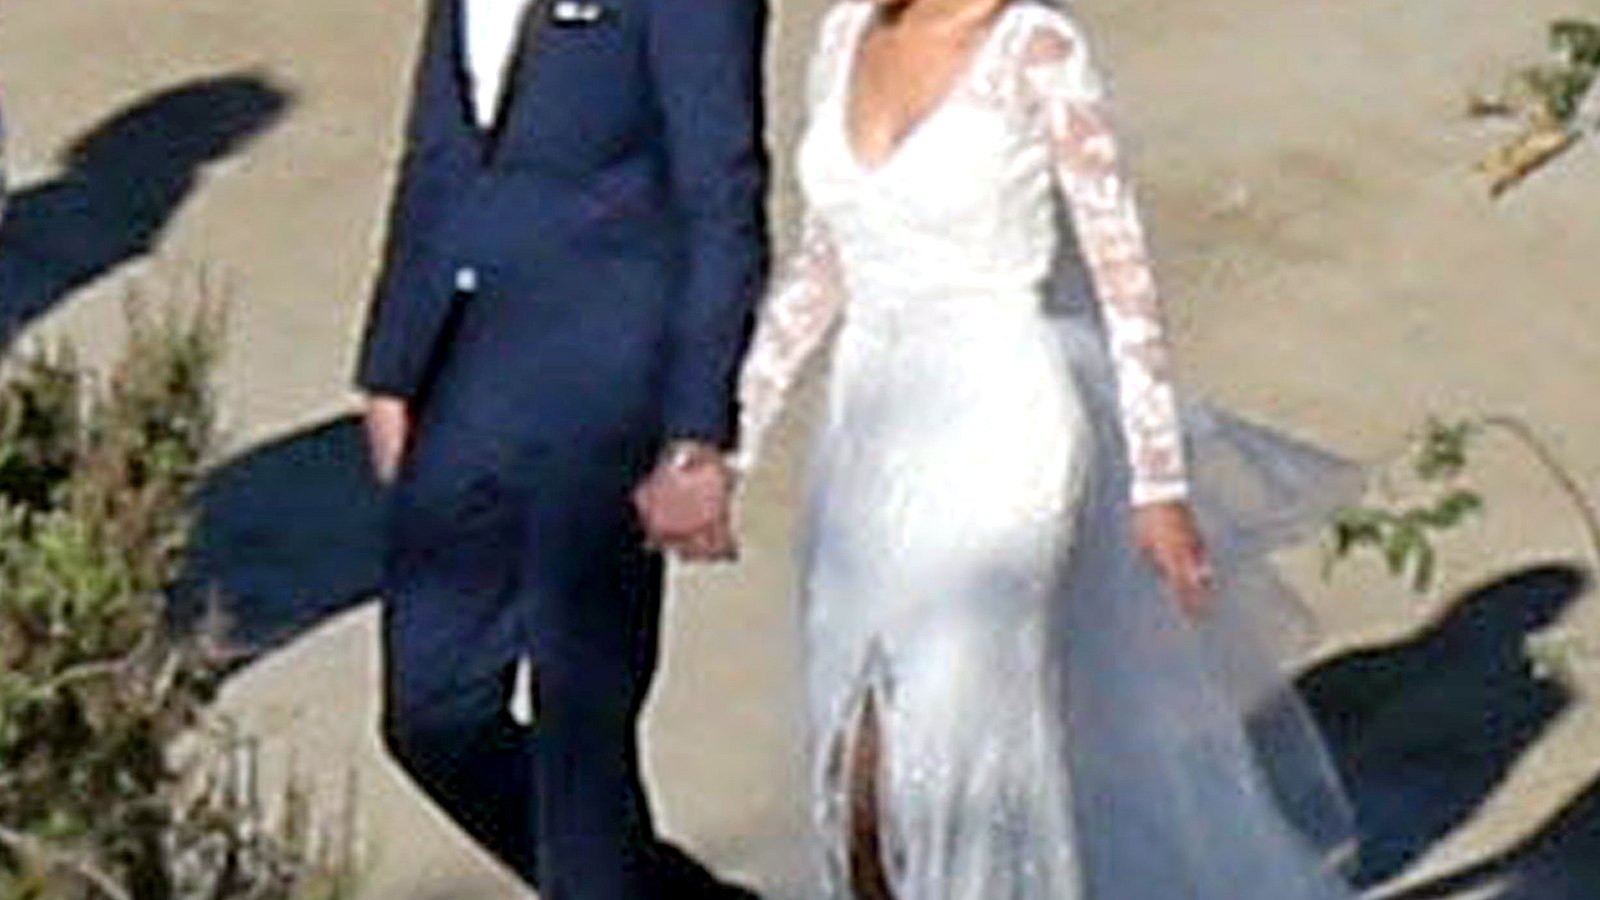 Bryan Greenberg and Jamie Chung get married on October 31, 2015.